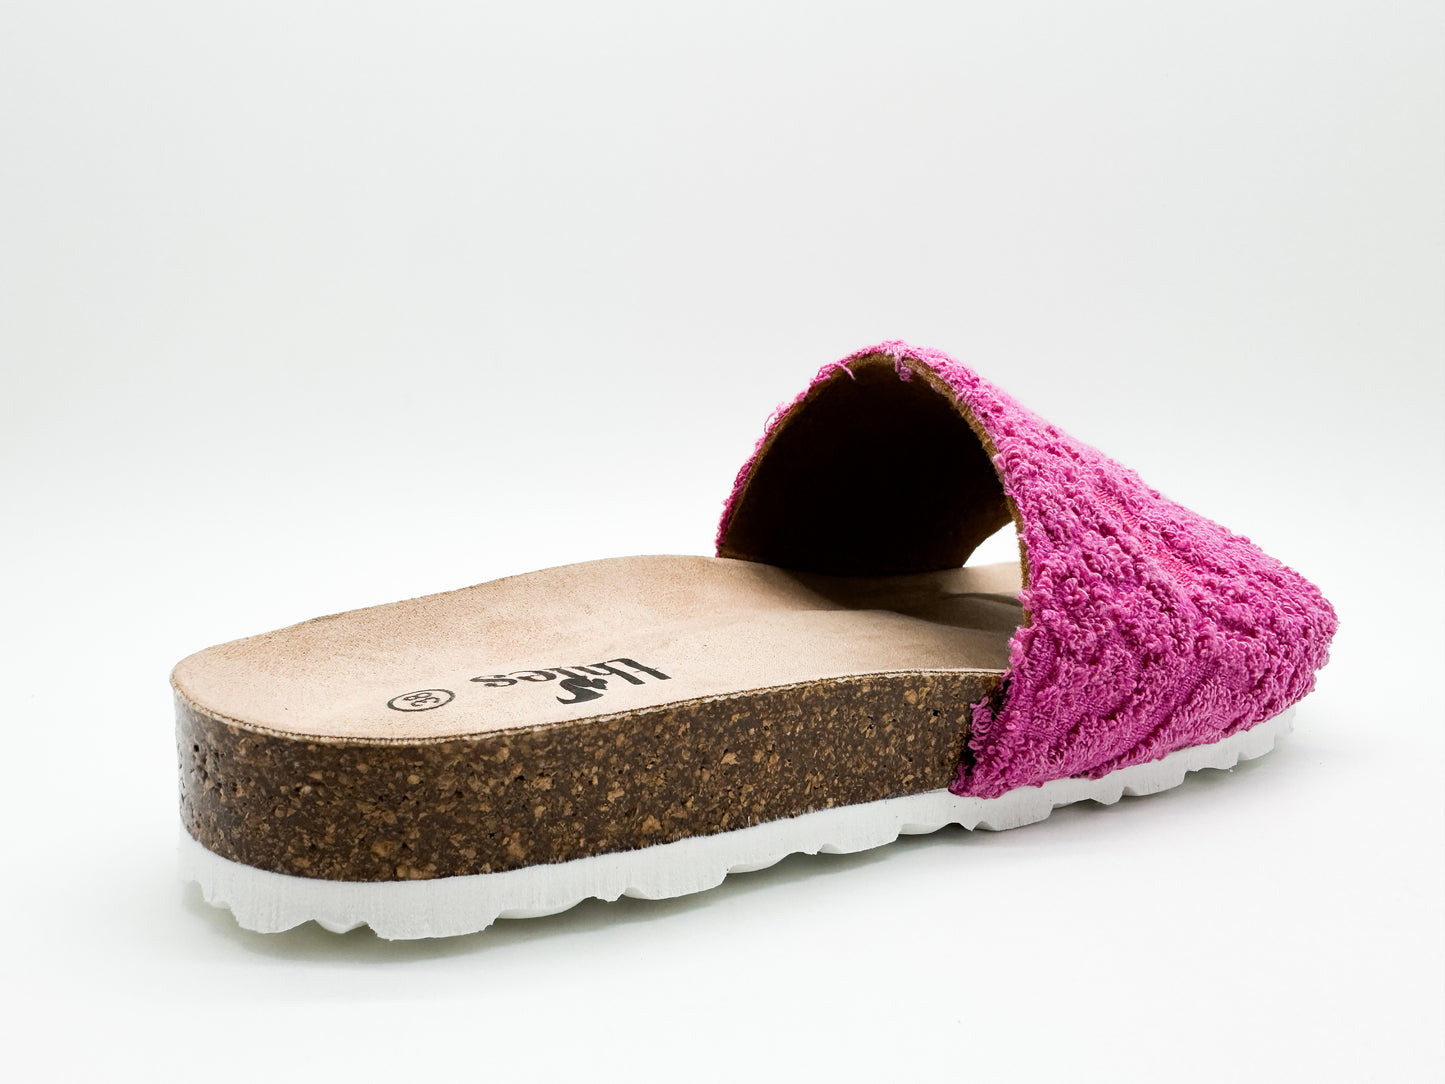 thies 1856 ® Eco Bio Terry Slide vegan orchid pink (W/X)